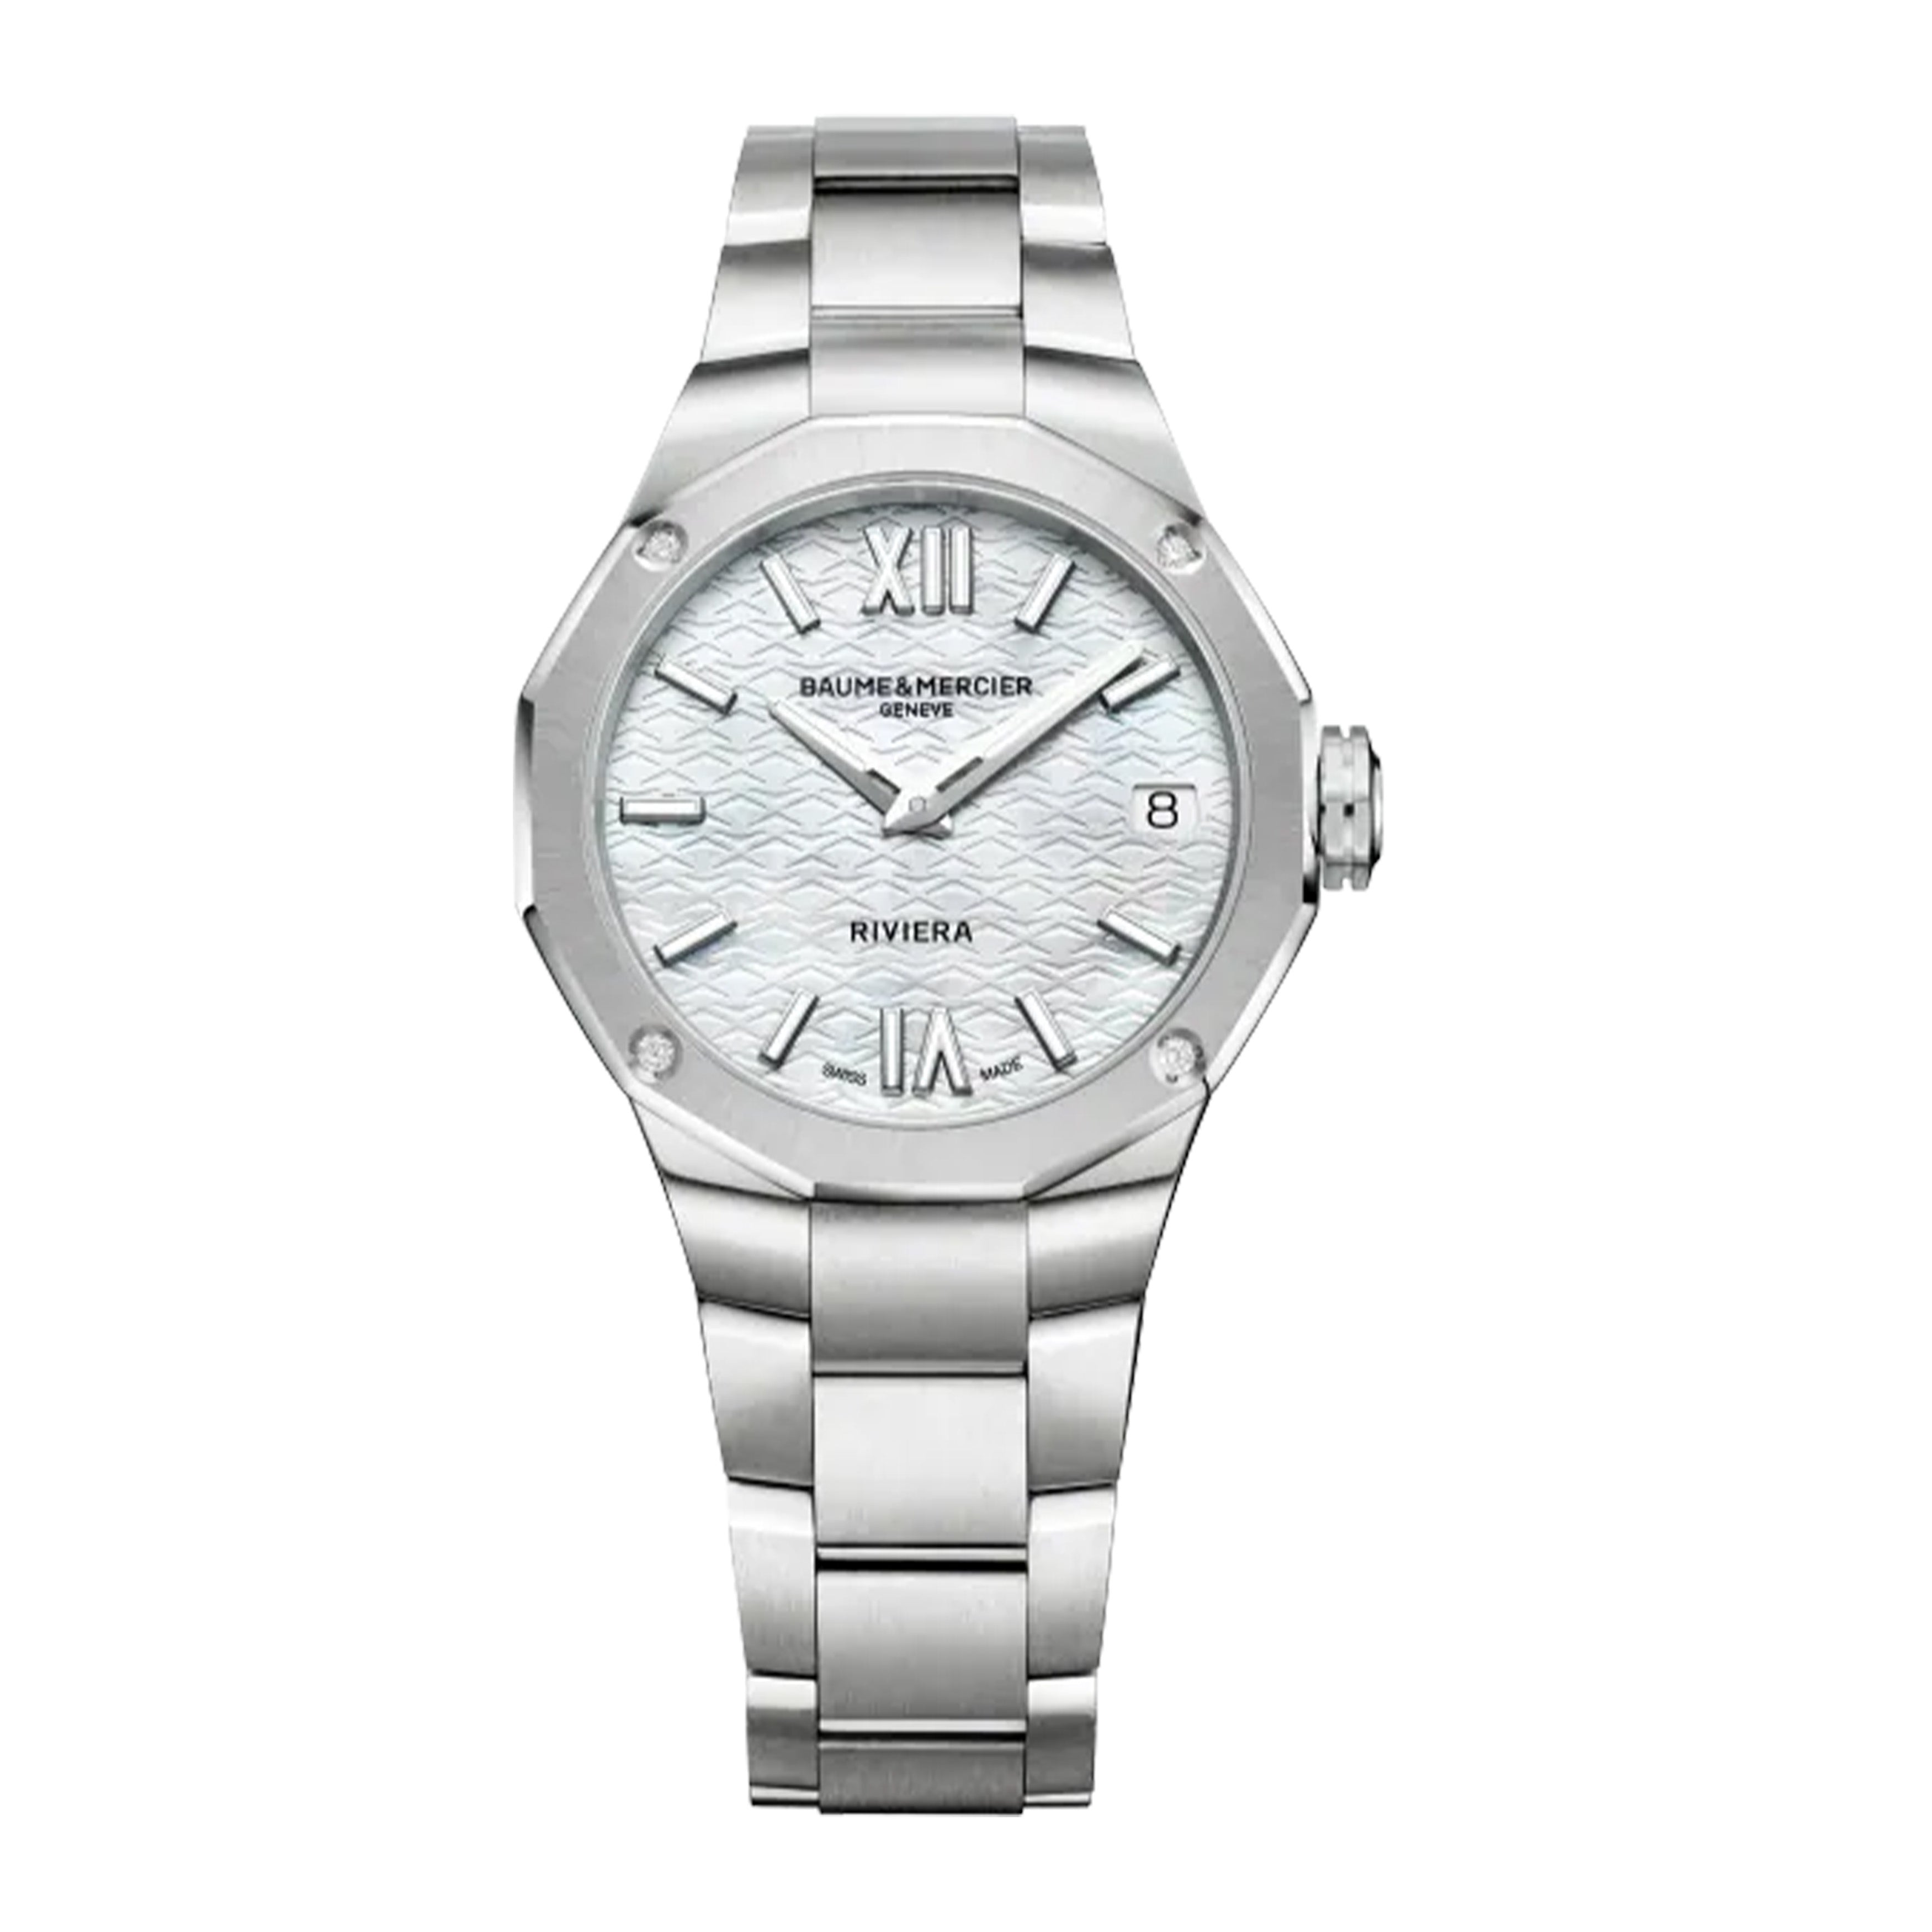 BAUME & MERCIER RIVIERA Watch, 33MM MOTHER OF PEARL DIAL, 10729